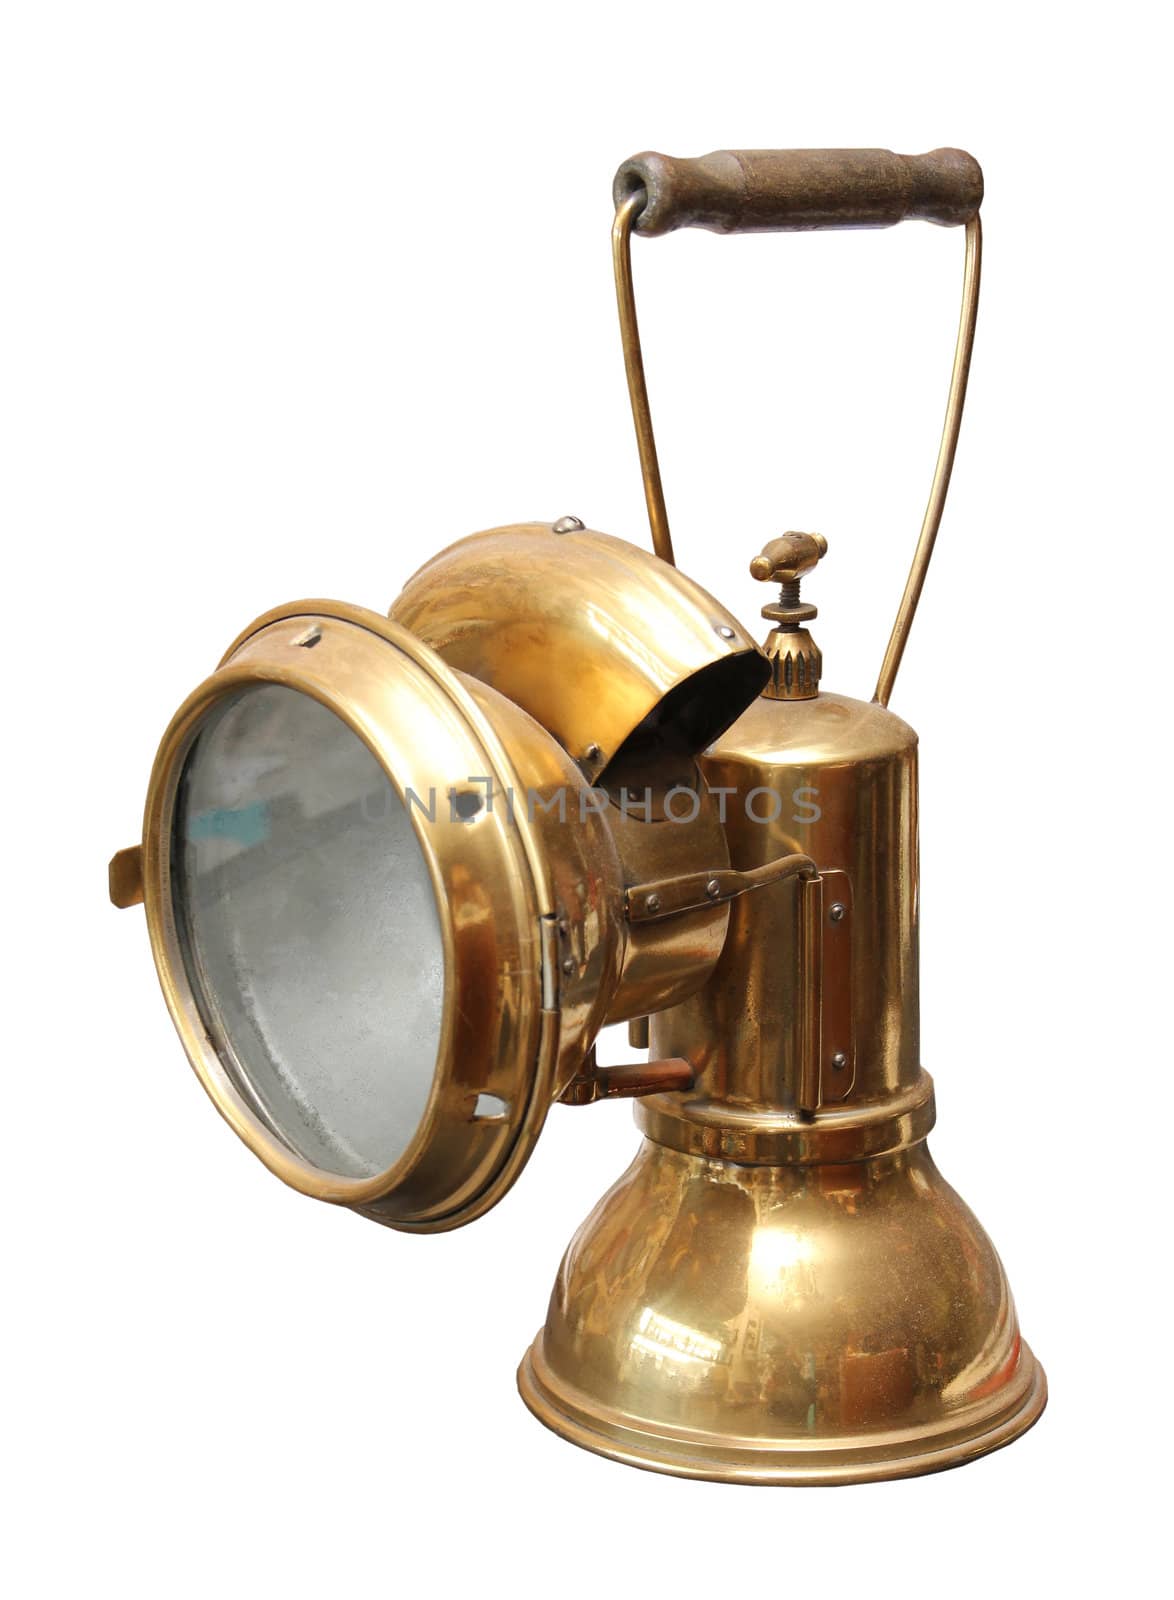 Old copper miner carbide lamp on a white background.